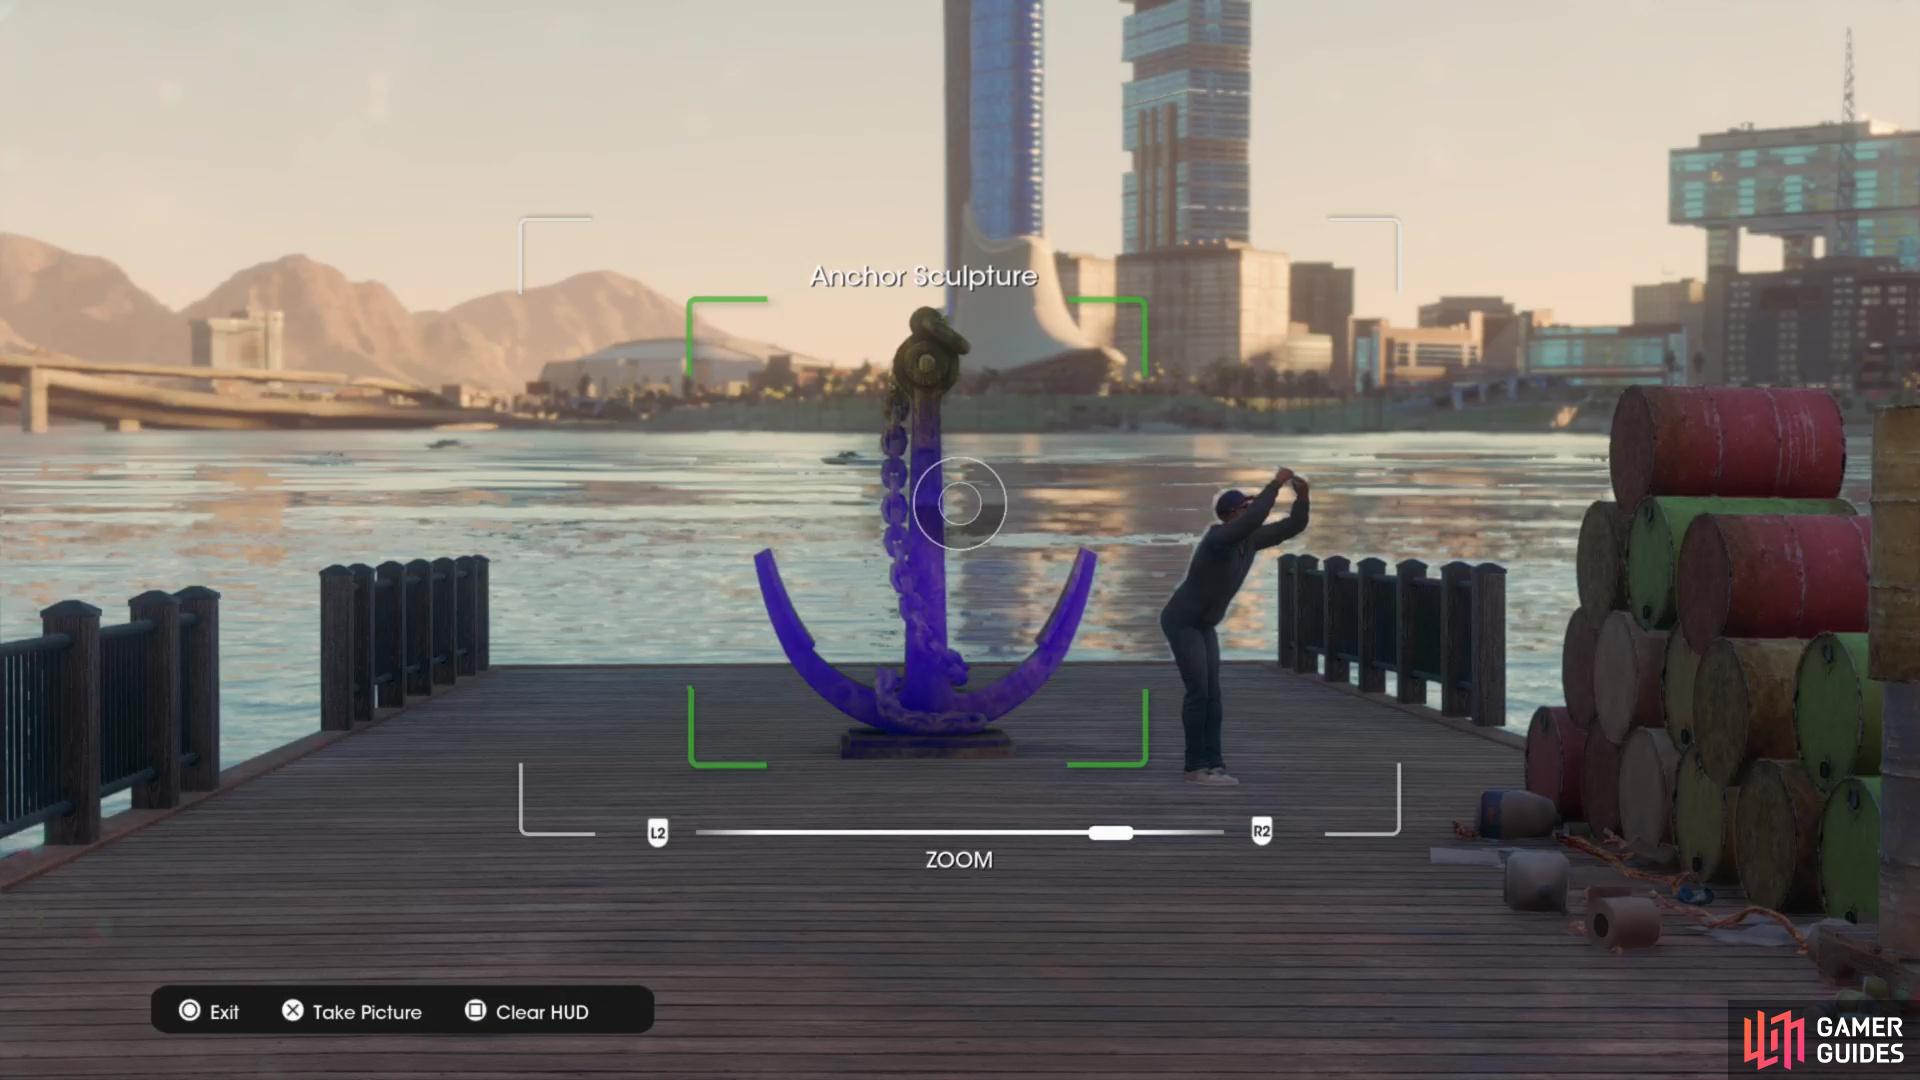 Take a picture of the Anchor Sculpture collectible to obtain it.